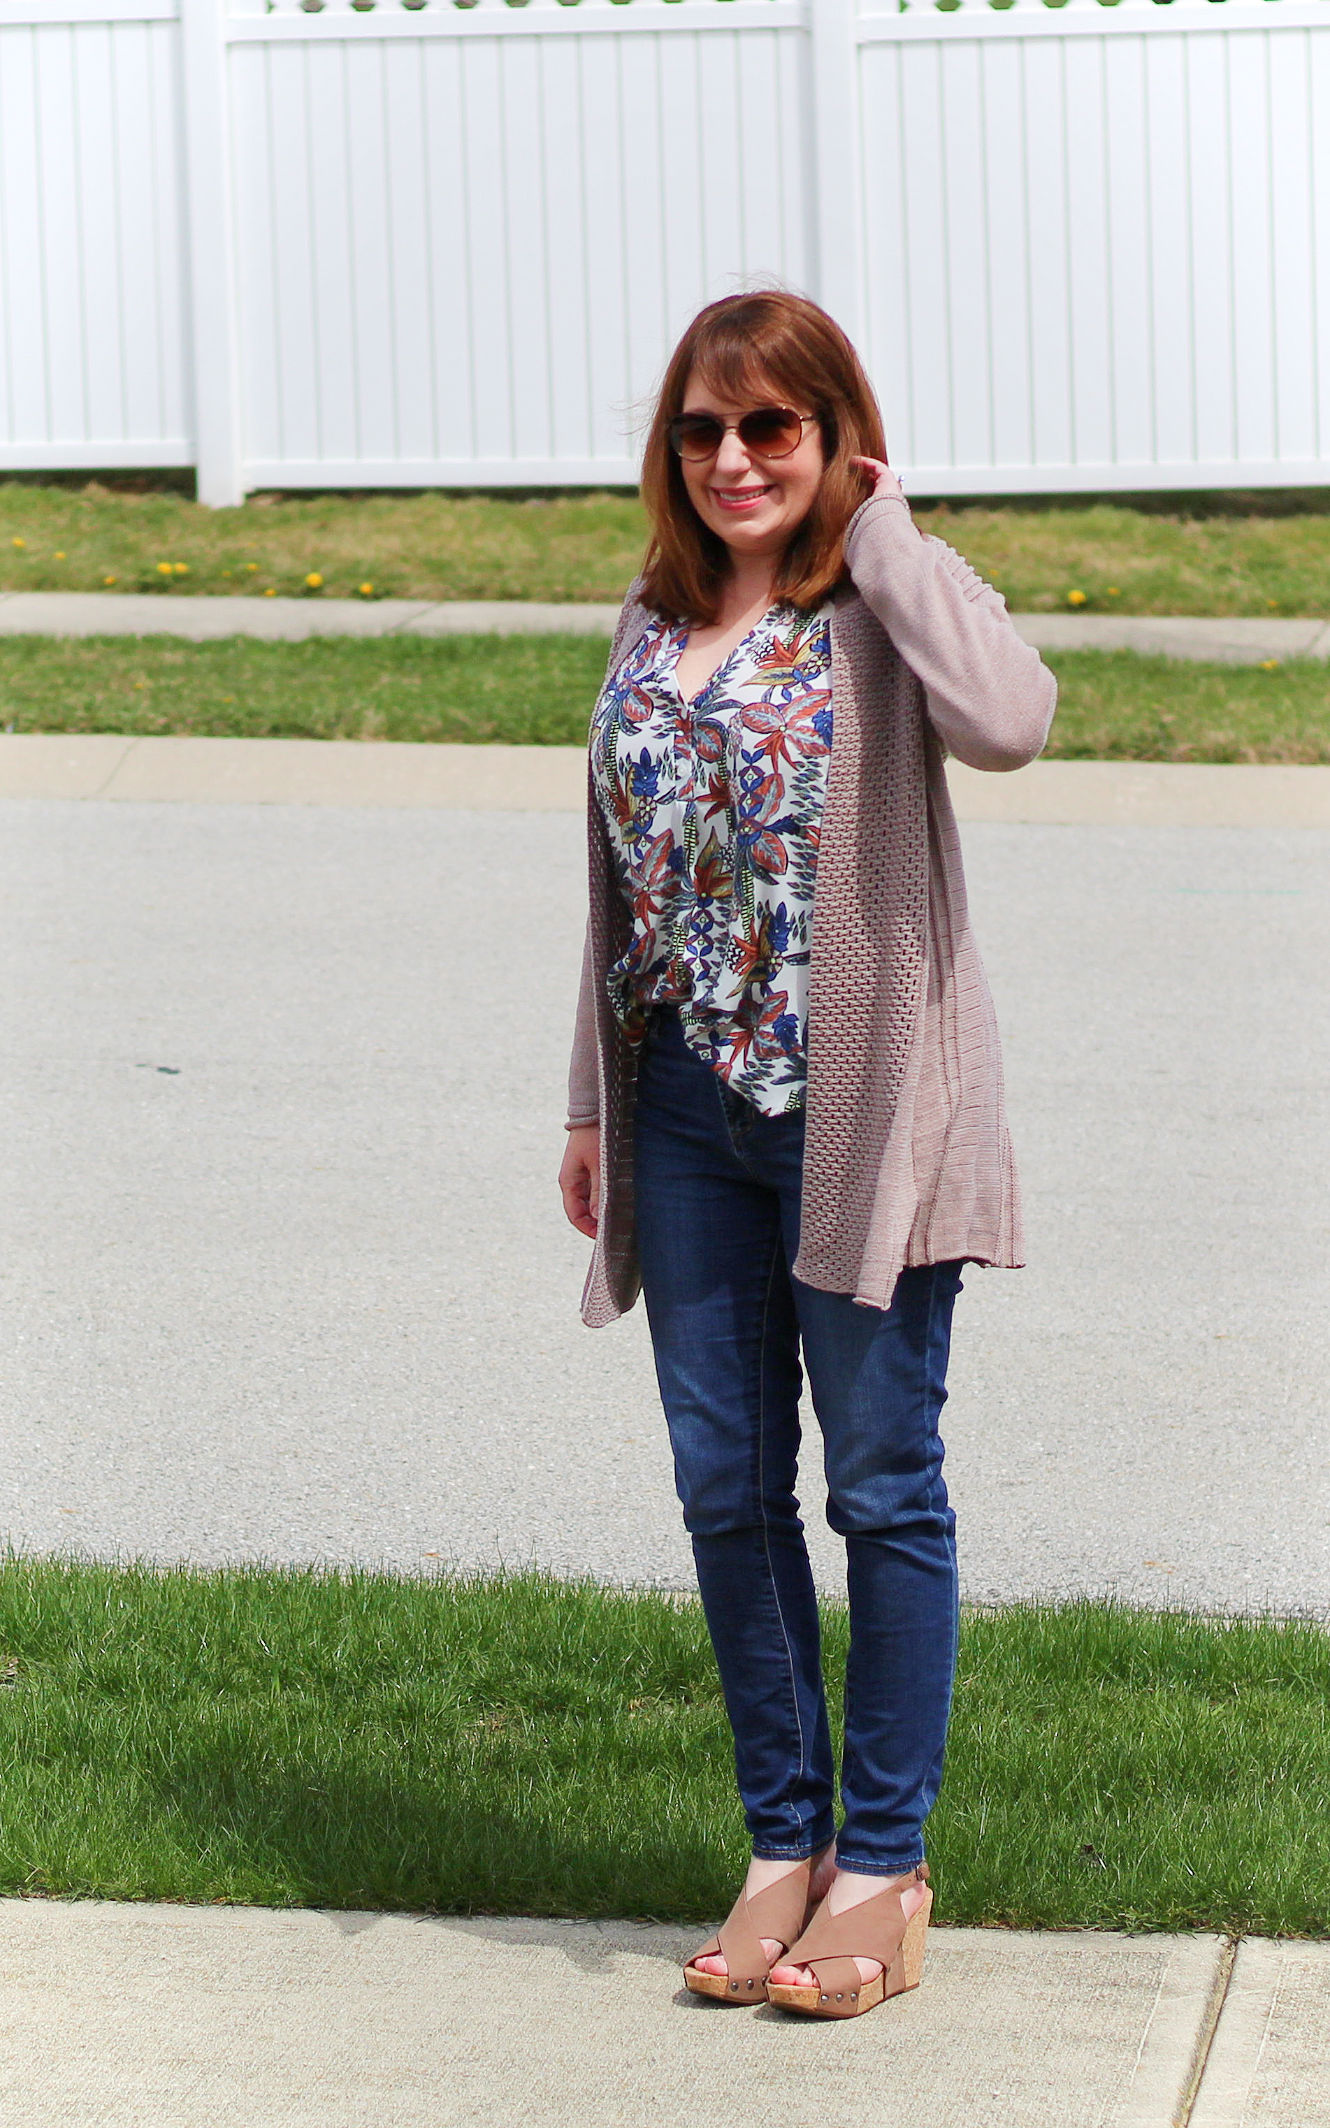 3 Outfit Ideas for Spring